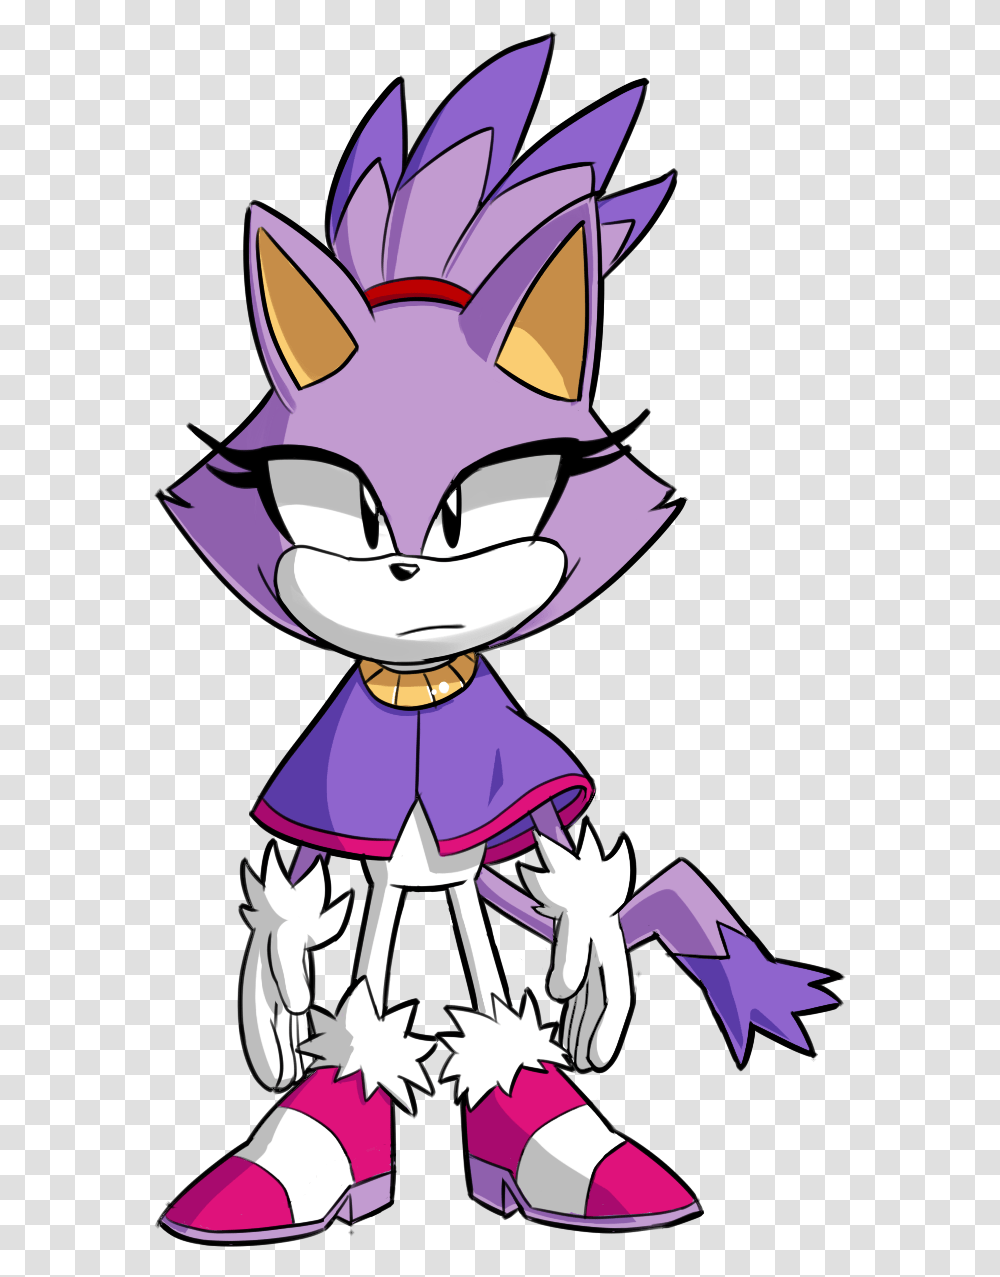 My Idea Of What Classic Blaze The Cat Might Look Like Classic Blaze The Cat, Sunglasses, Accessories, Accessory Transparent Png